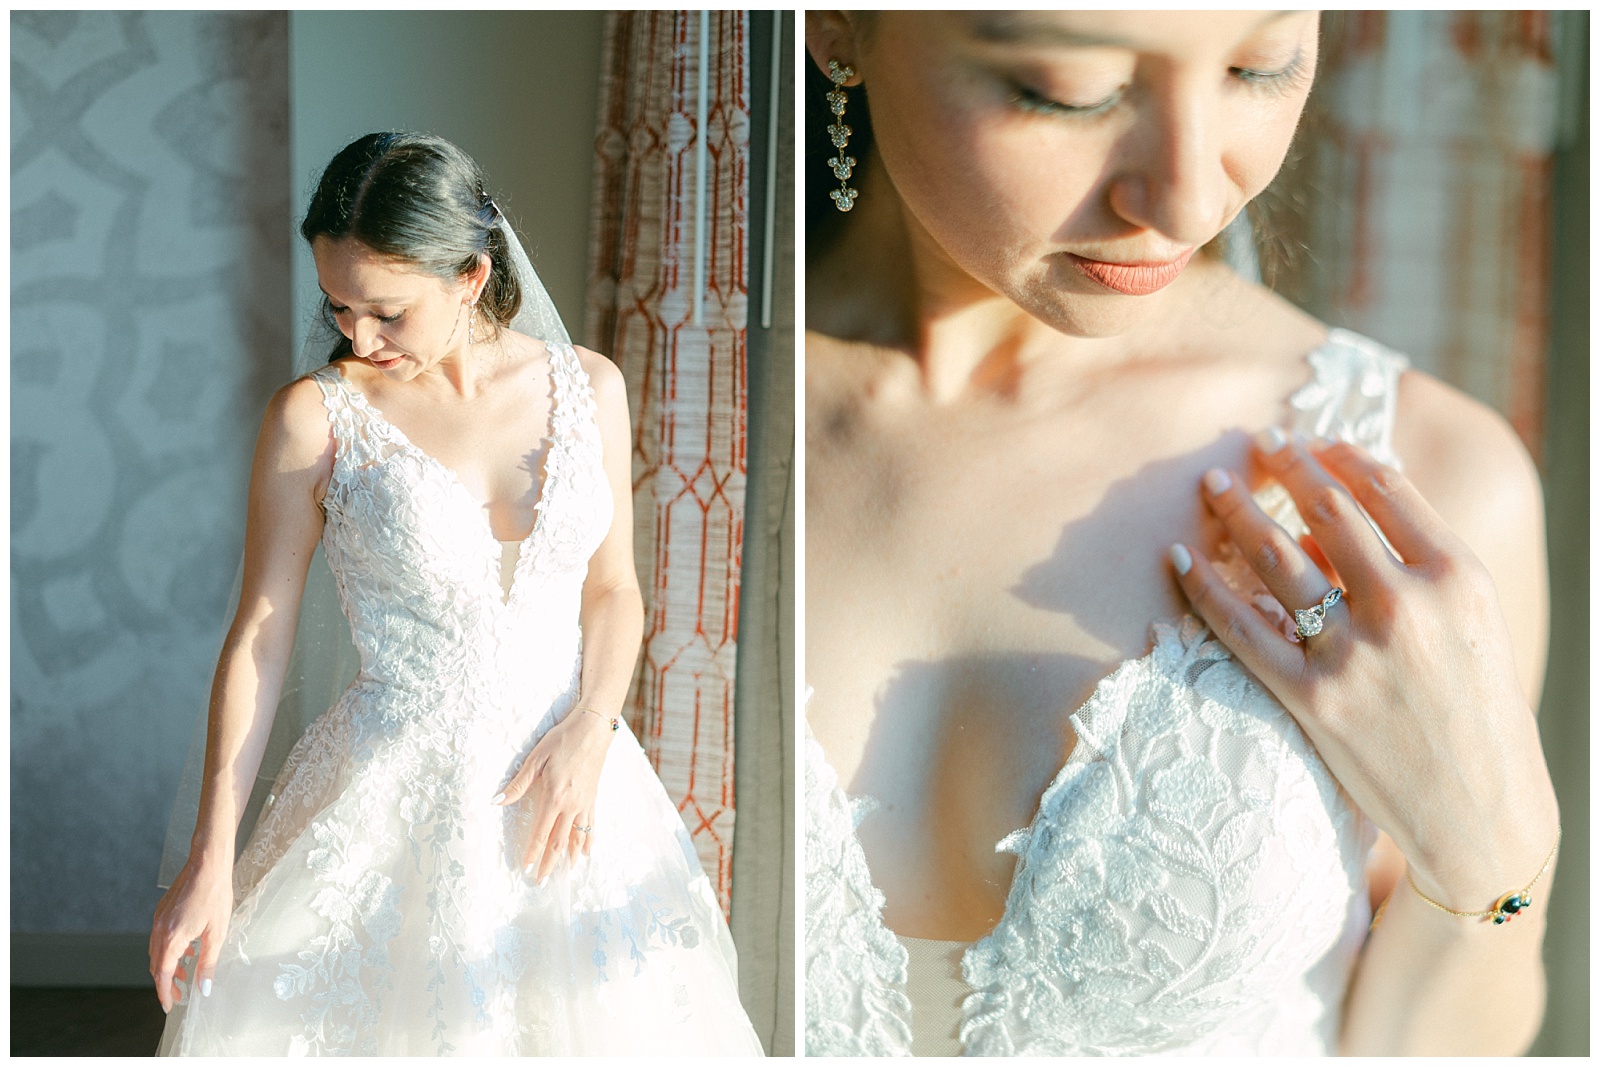 Left: Bride fixing her wedding dress during in room portraits.
Right: Close up detail photo of the bride's engagement ring.
By Elizabeth Kane Photography at Disney's Riviera Resort in Orlando Florida